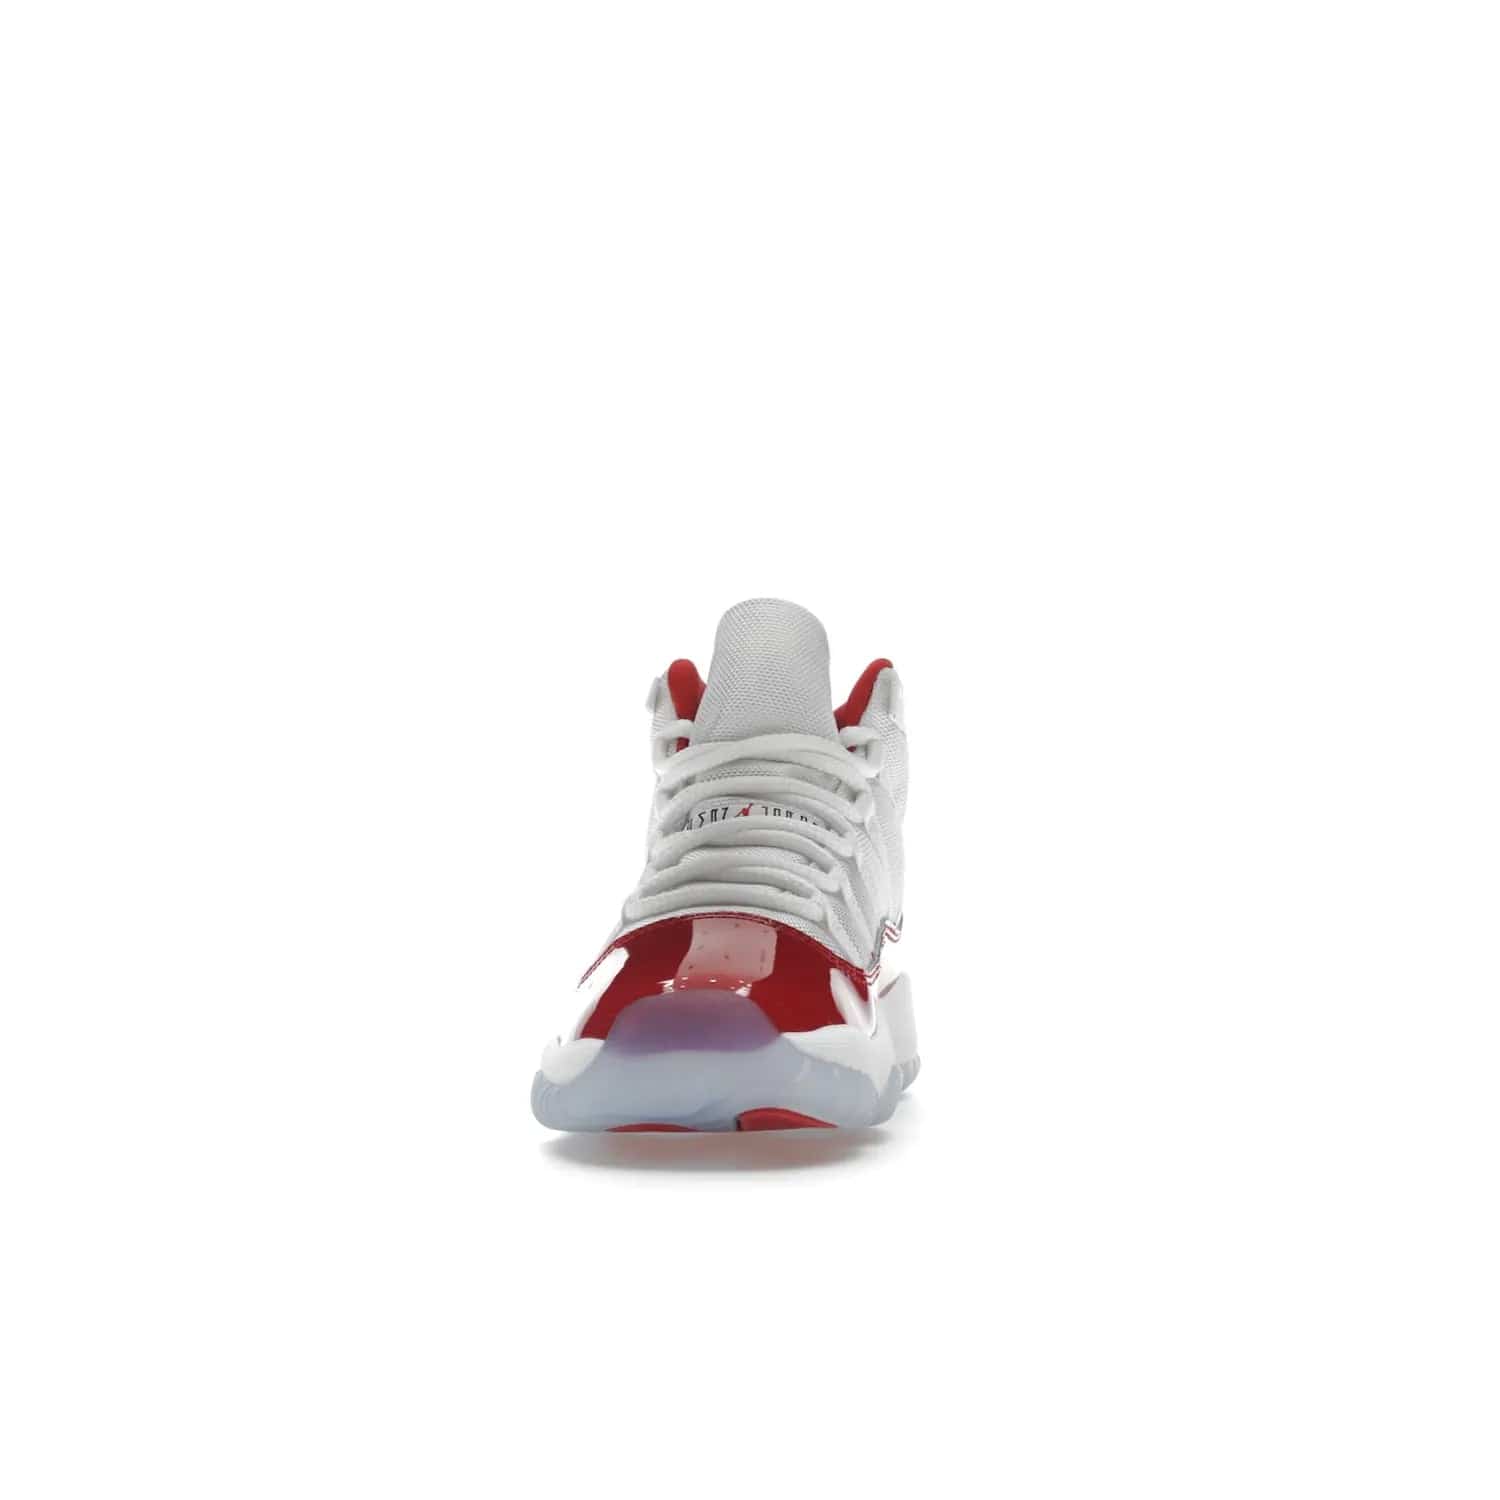 Jordan 11 Retro Cherry (2022) (GS) - Image 11 - Only at www.BallersClubKickz.com - Shop the Air Jordan 11 Retro Cherry 2022 GS, designed for style & comfort. Snug fit with webbing eyelets, rope laces, encased Air-sole unit & a Translucent rubber outsole. Available 12/10/2022.